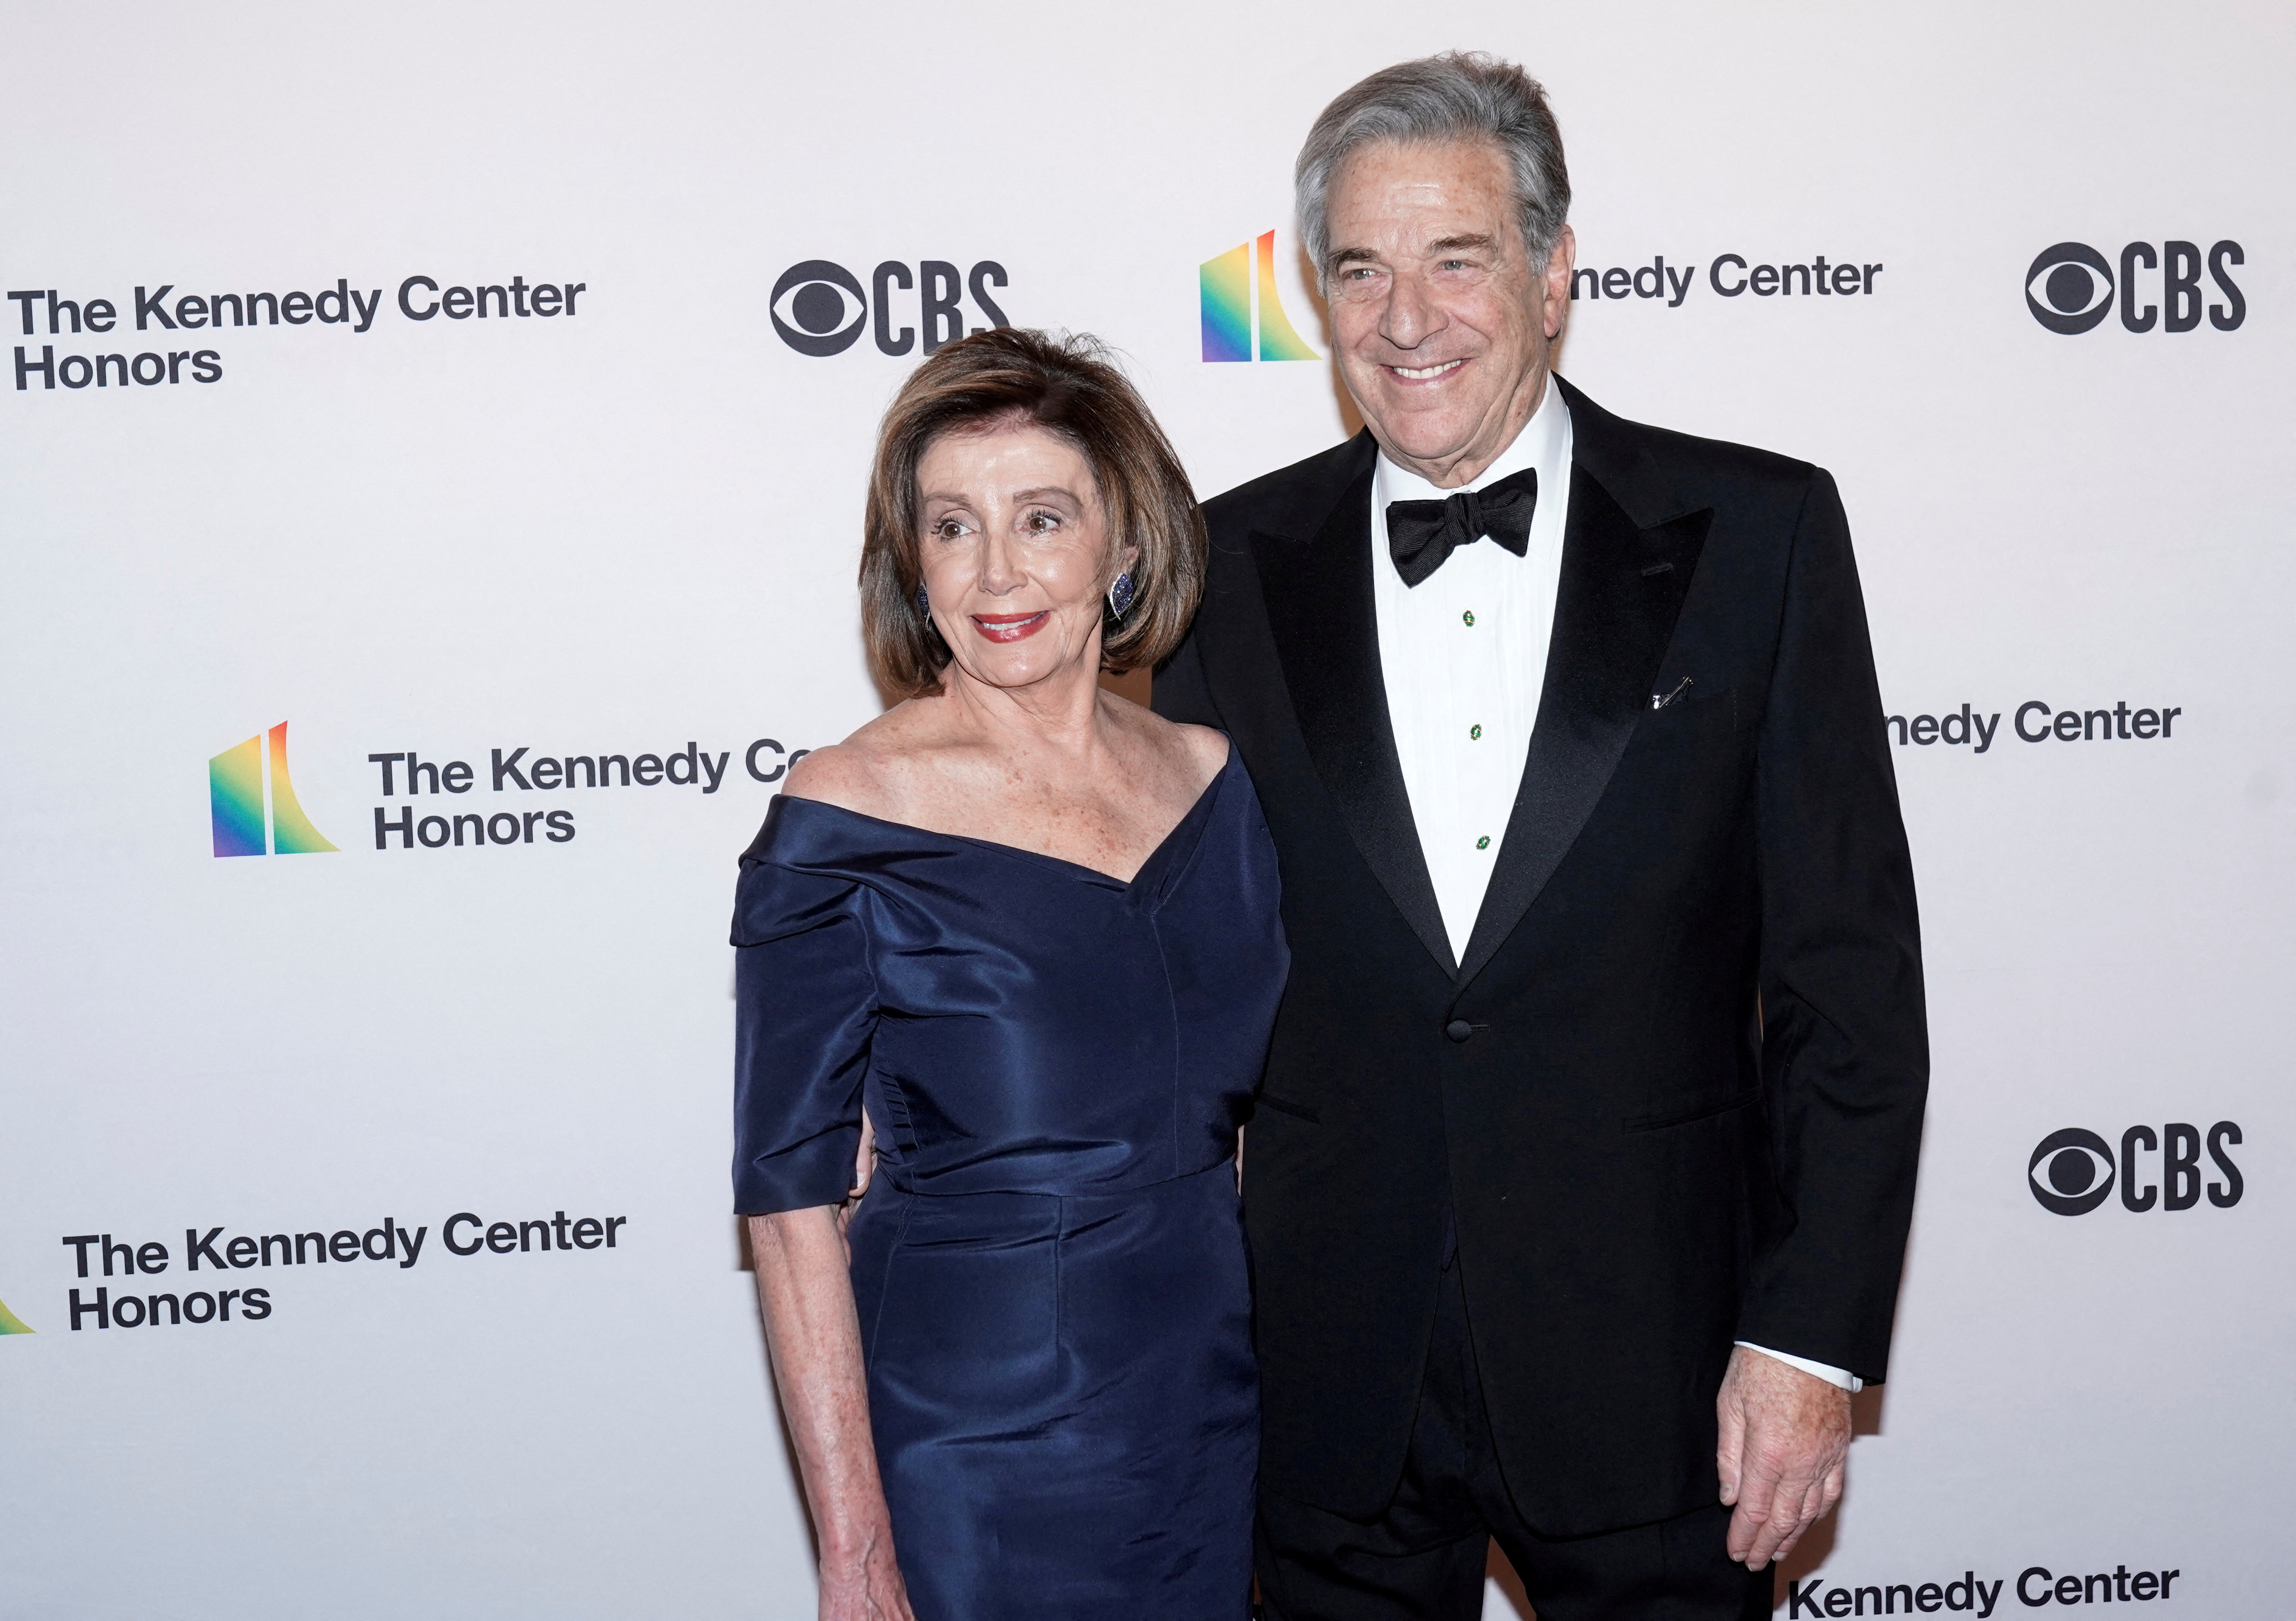 Speaker of the House Nancy Pelosi (D-CA) and her husband Paul Pelosi arrive for the 42nd Annual Kennedy Awards Honors in Washington